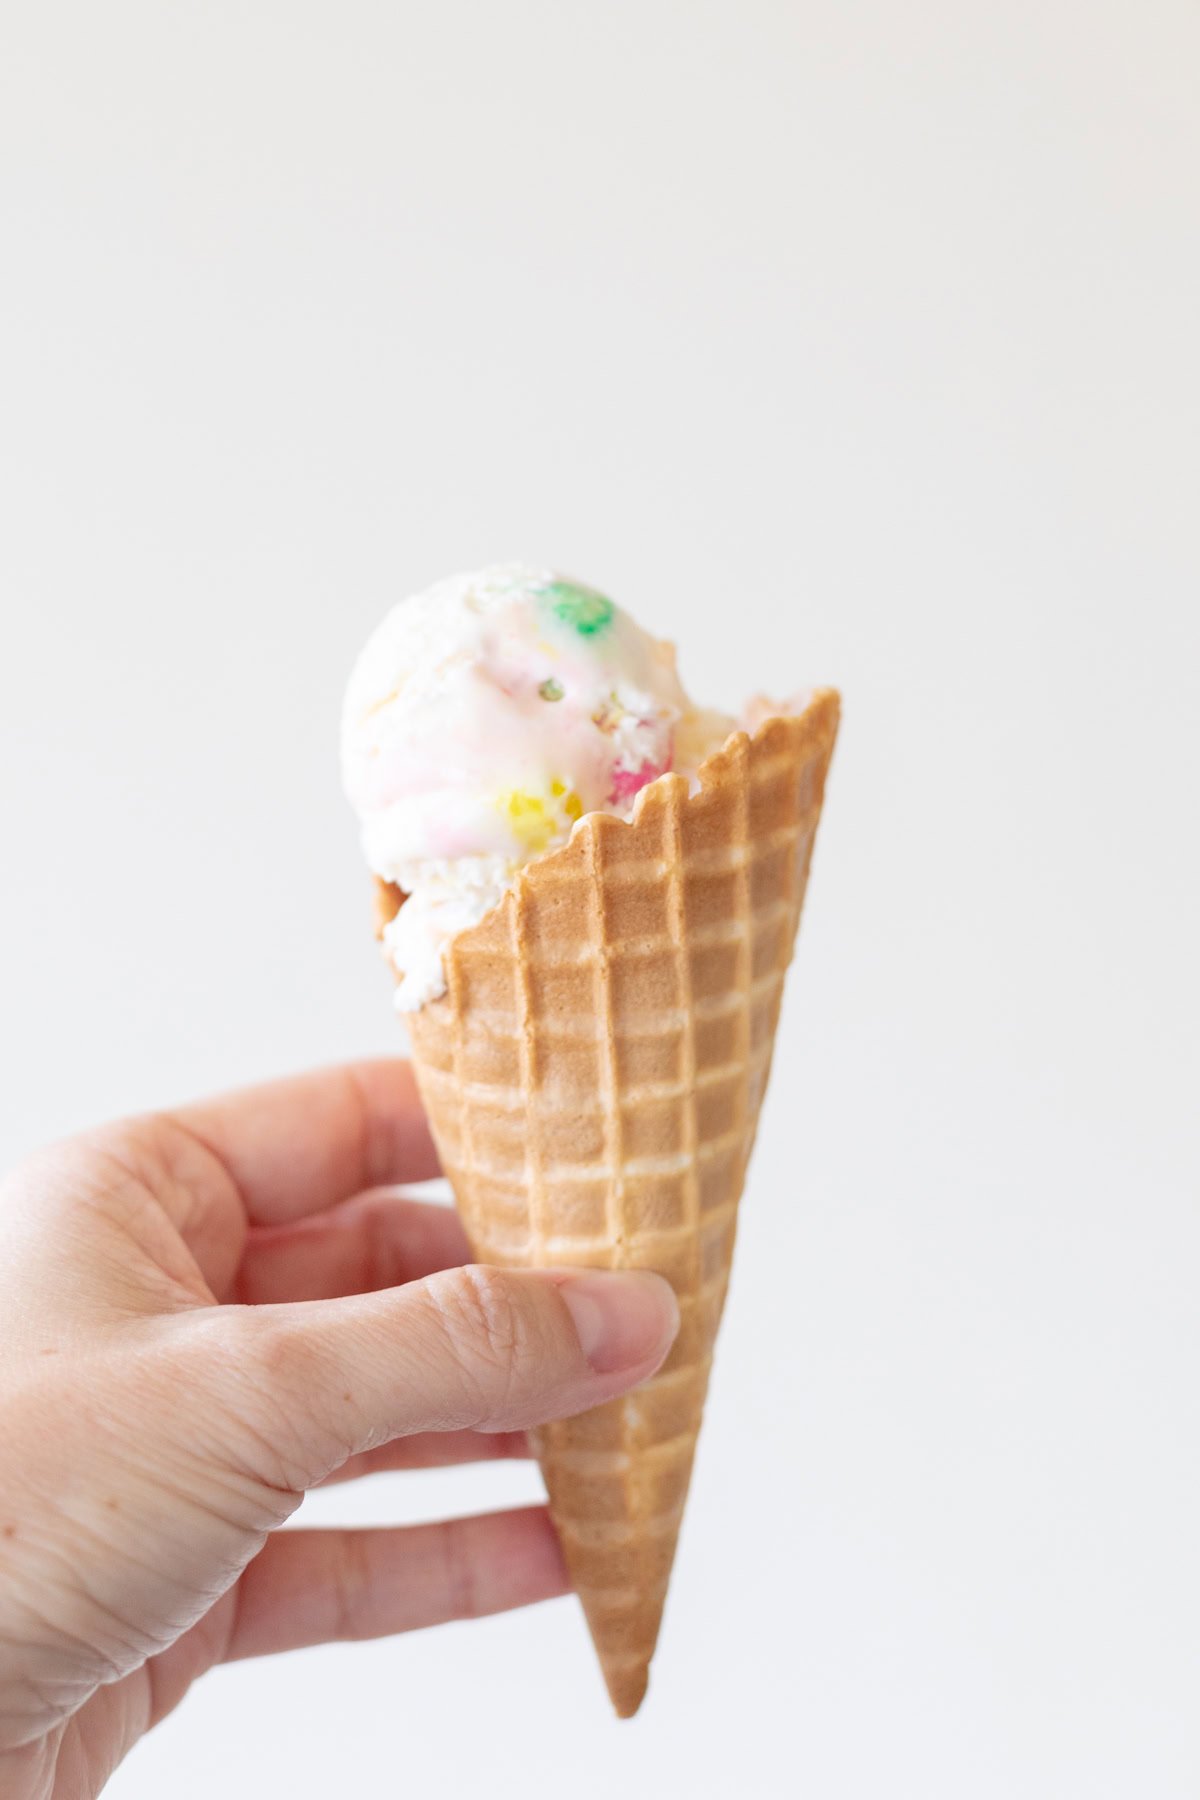 A hand holding a waffle cone with a single scoop of colorful bubble gum ice cream against a plain white background.